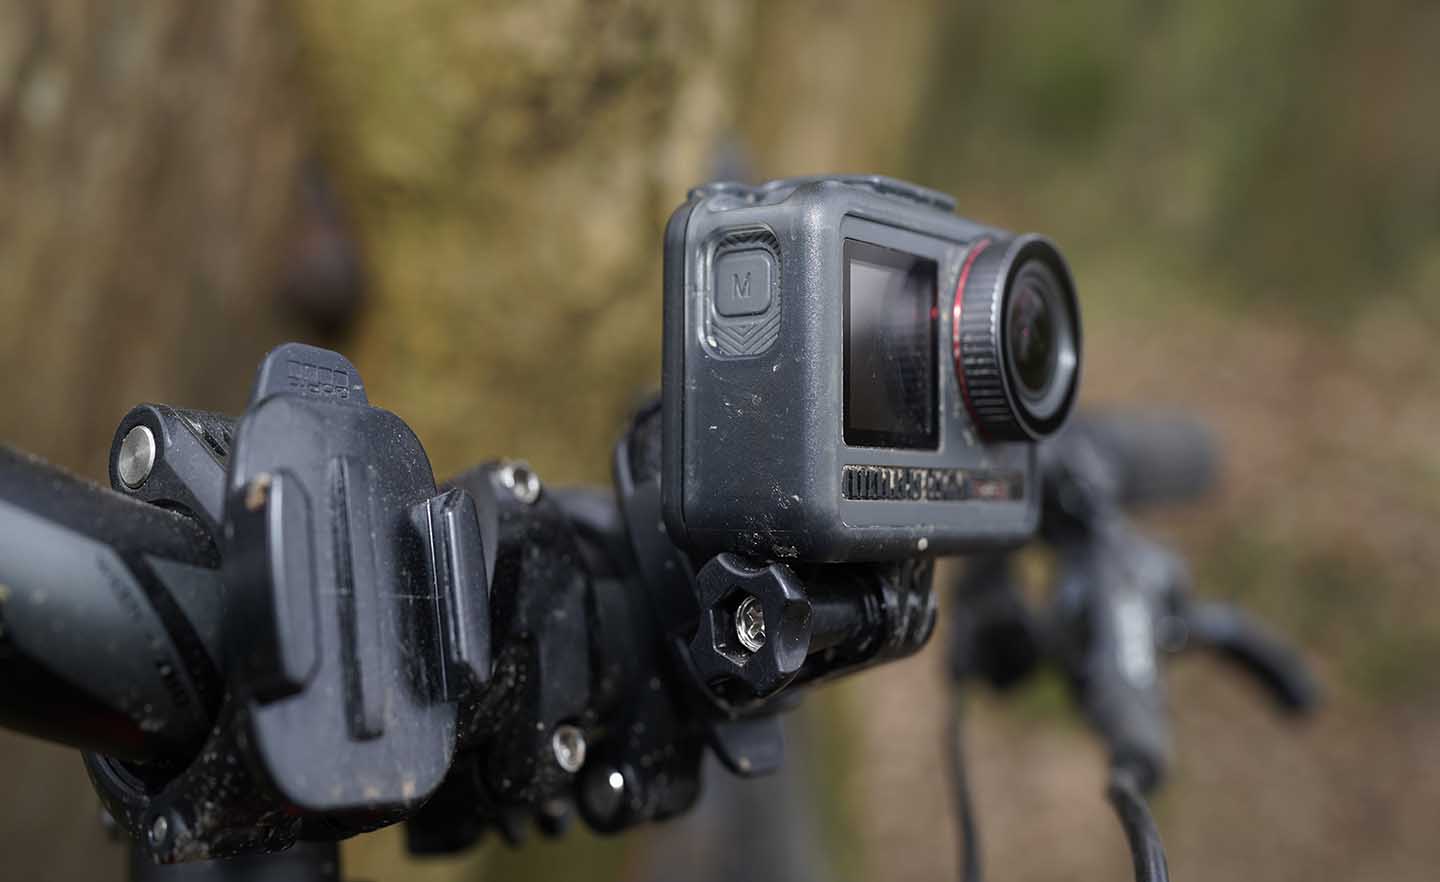 Akaso Brave 8 Action Camera Full Review: Great Hardware Meets Poor  Software 